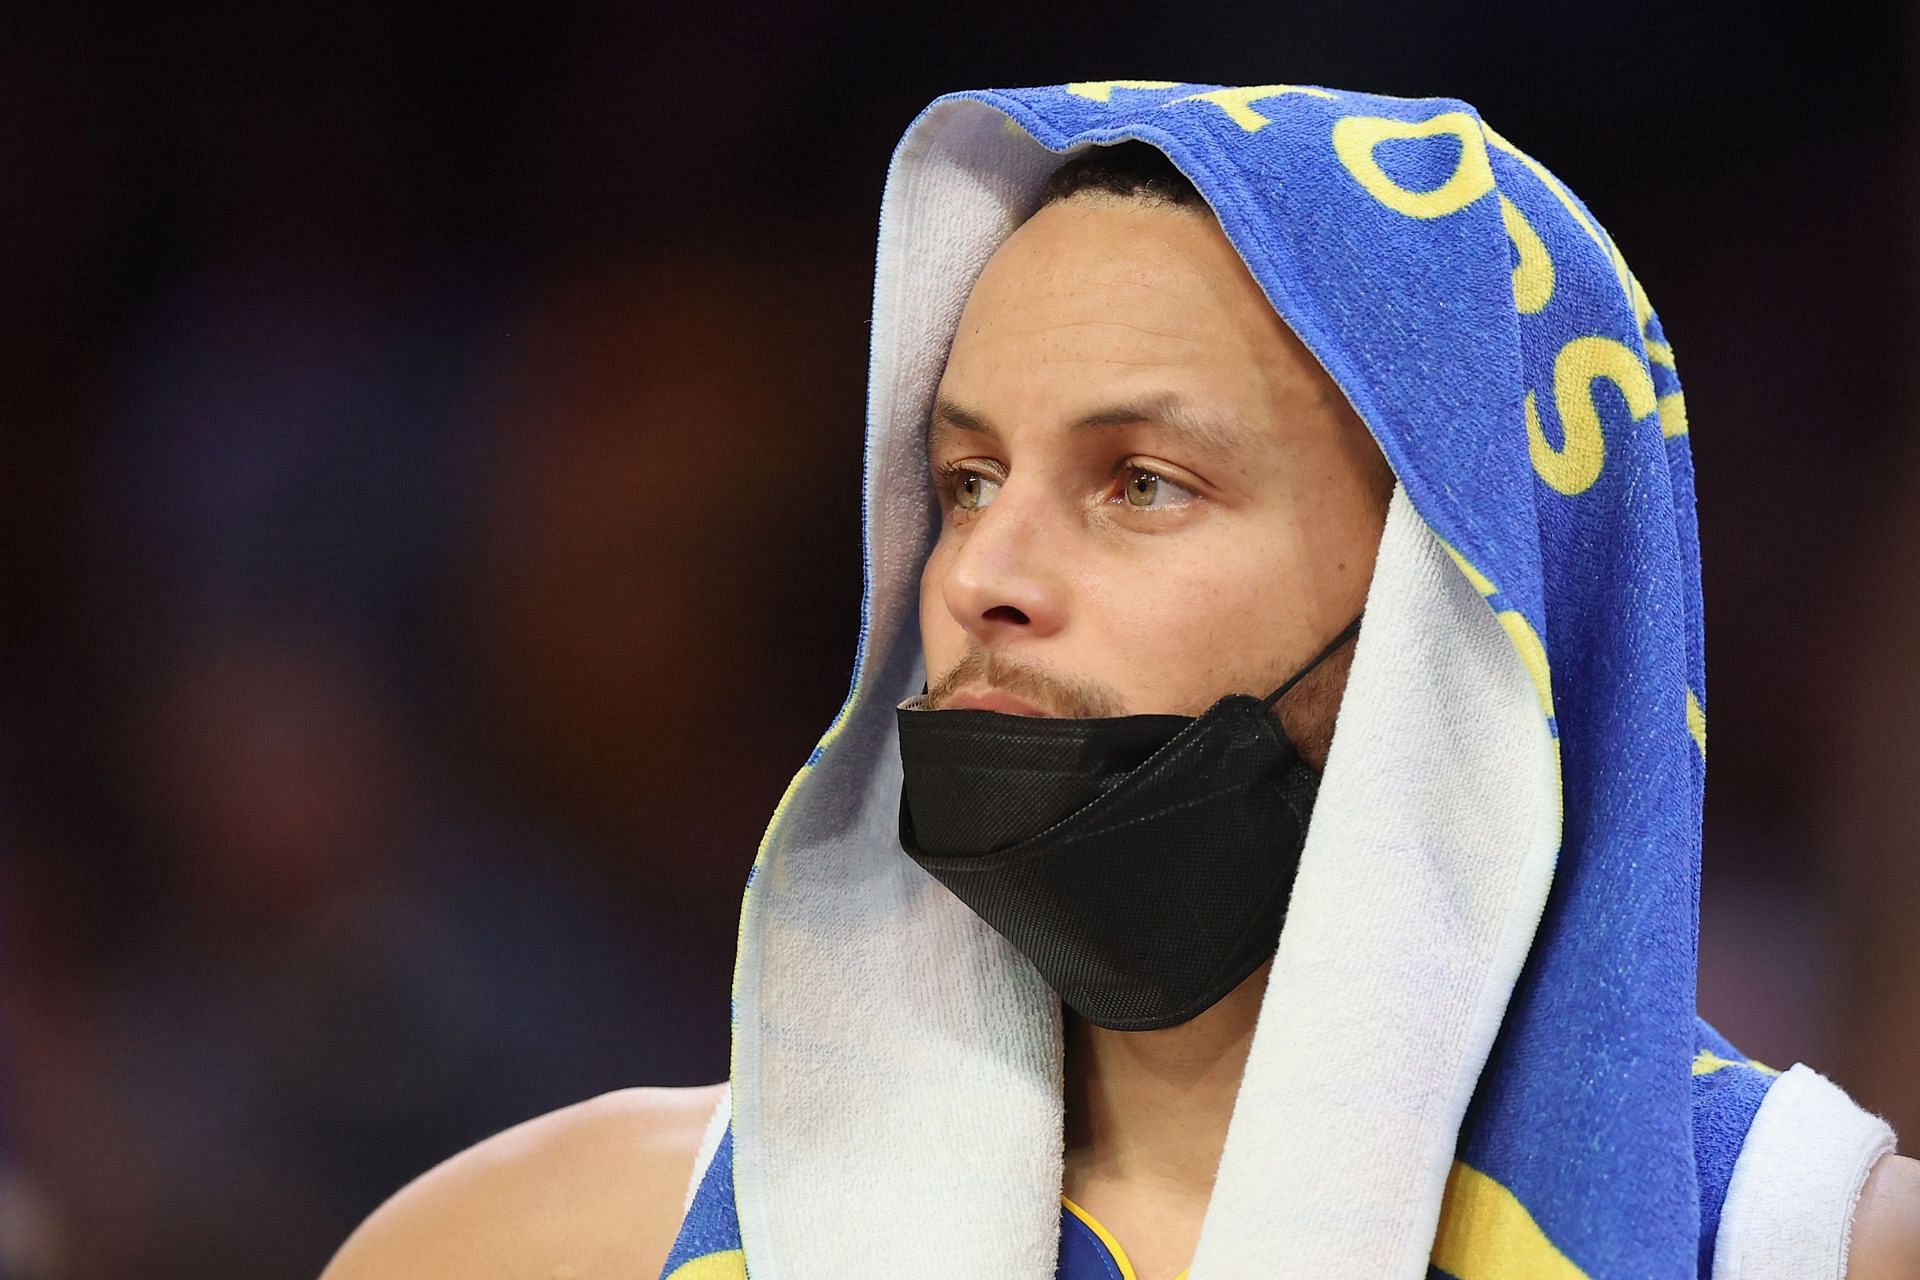 Stephen Curry of the Golden State Warriors.